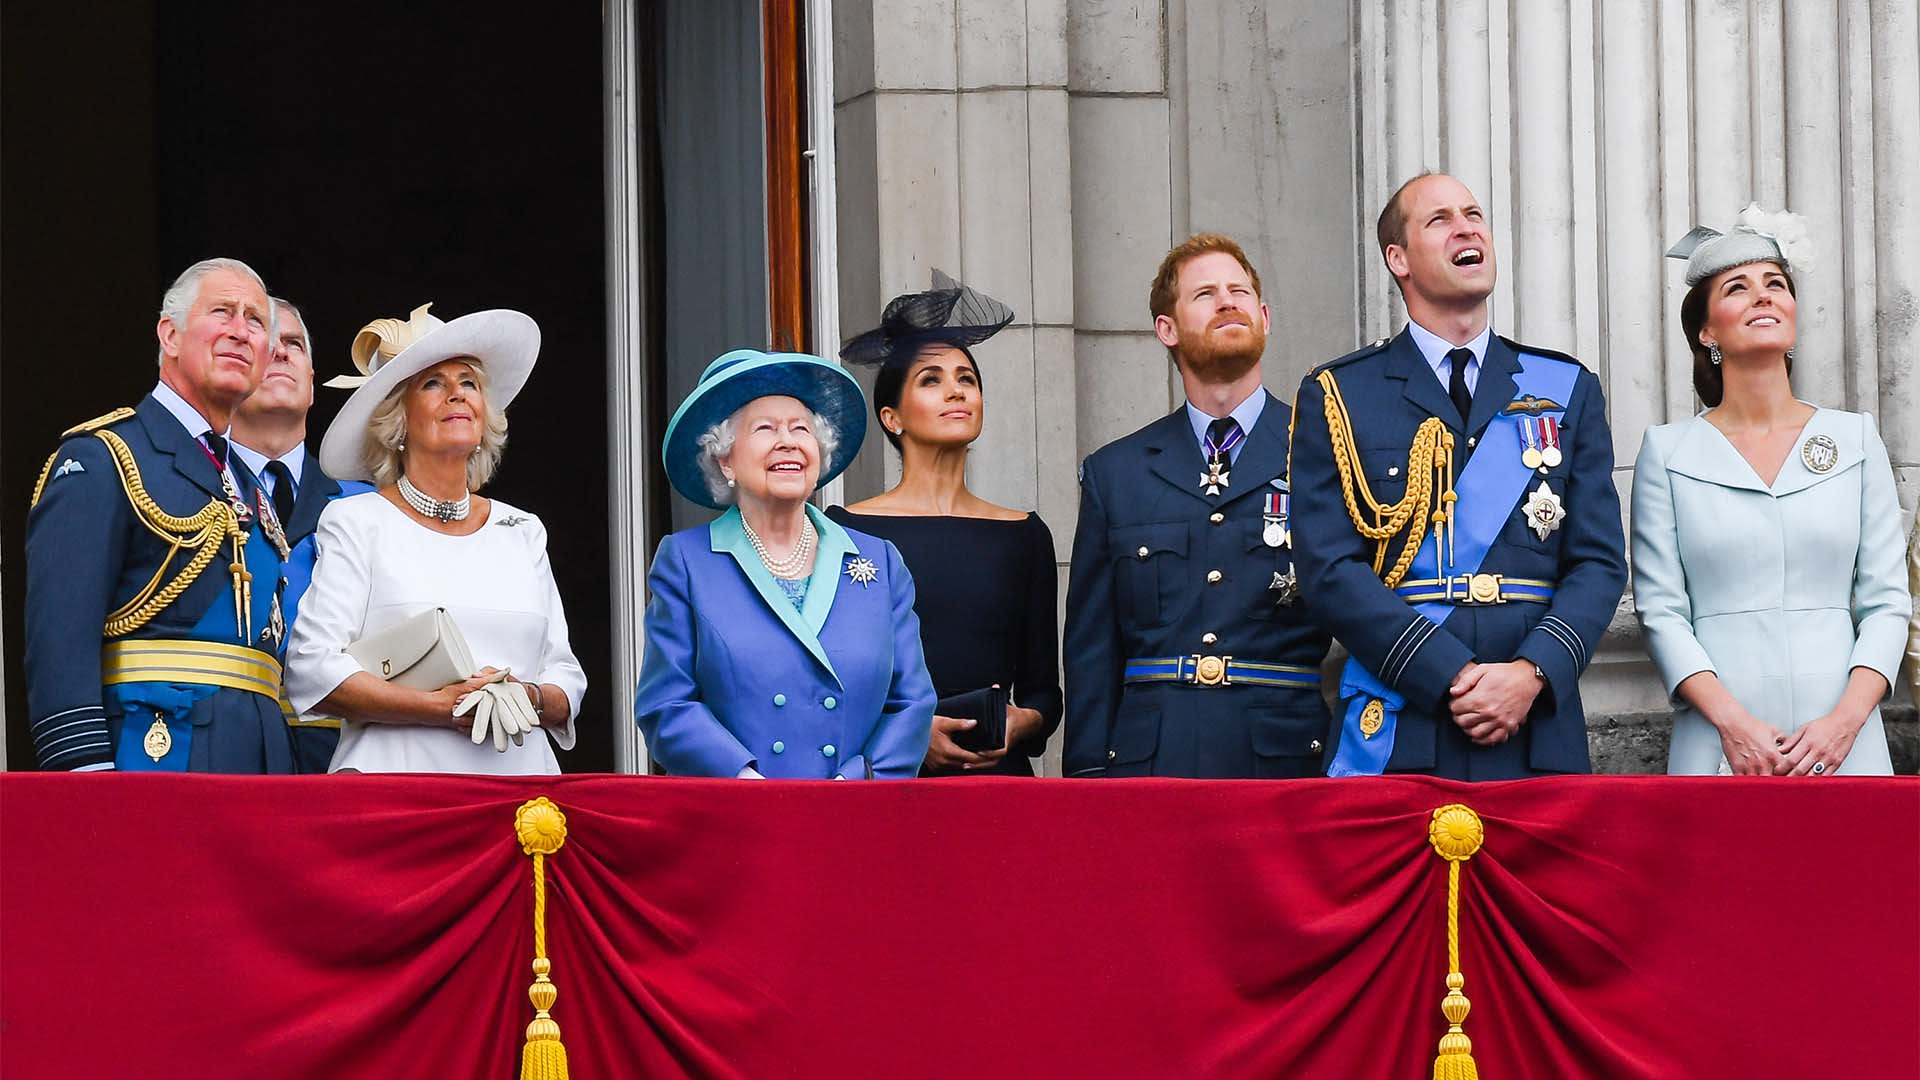 Members of the British royal family stand on the balcony of Buckingham Palace in London to view a flypast to mark the centenary of the Royal Air Force. 